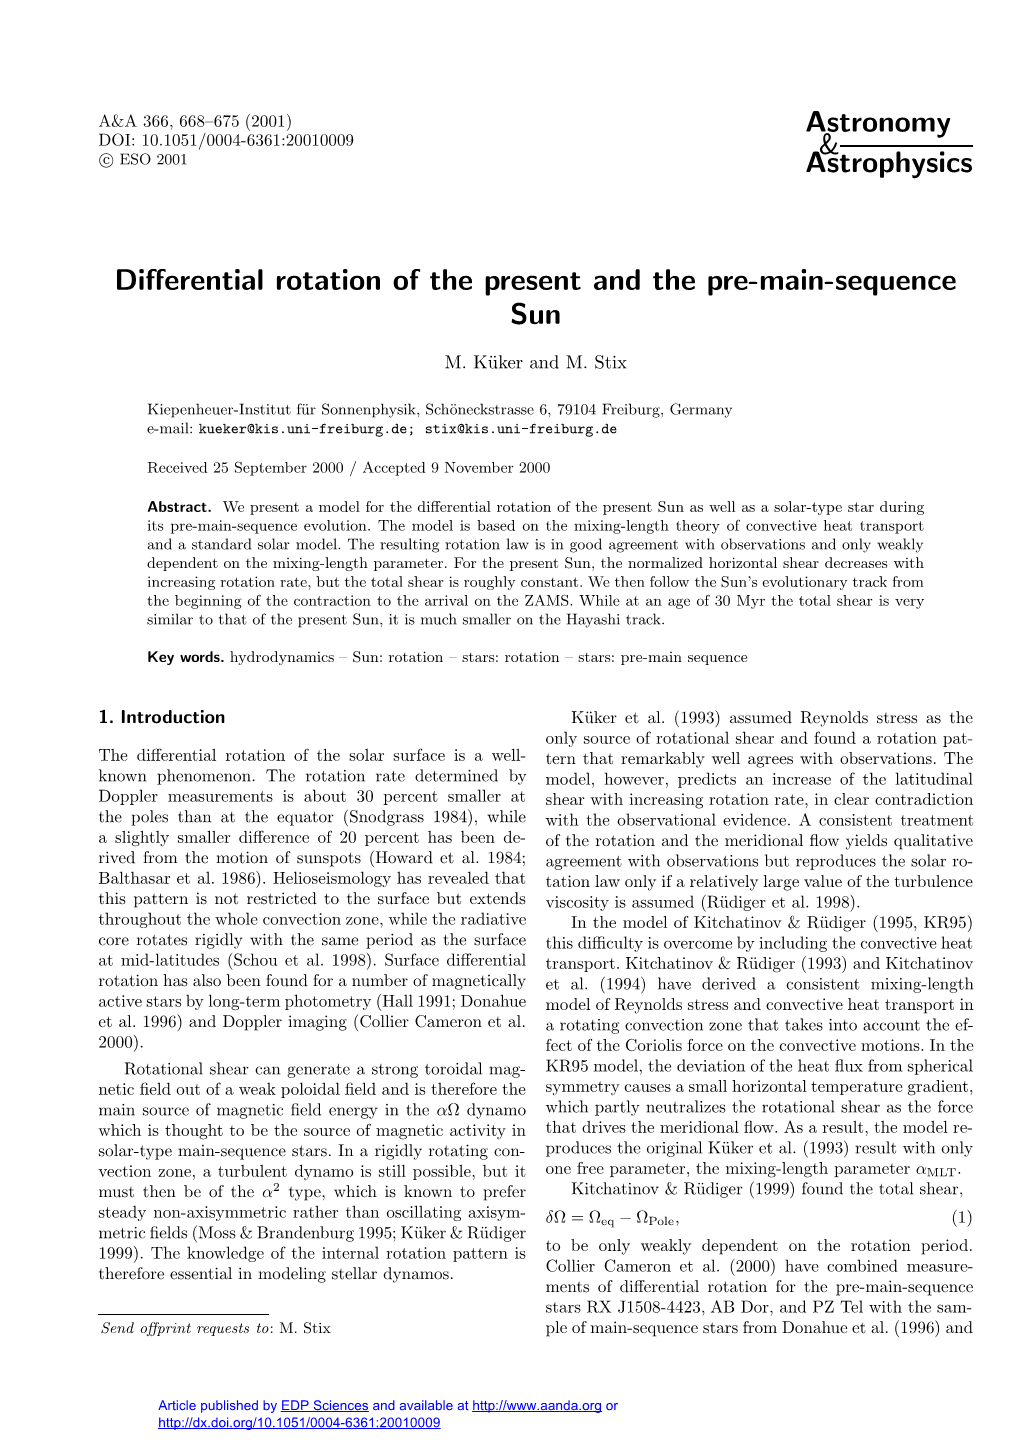 Differential Rotation of the Present and the Pre-Main-Sequence